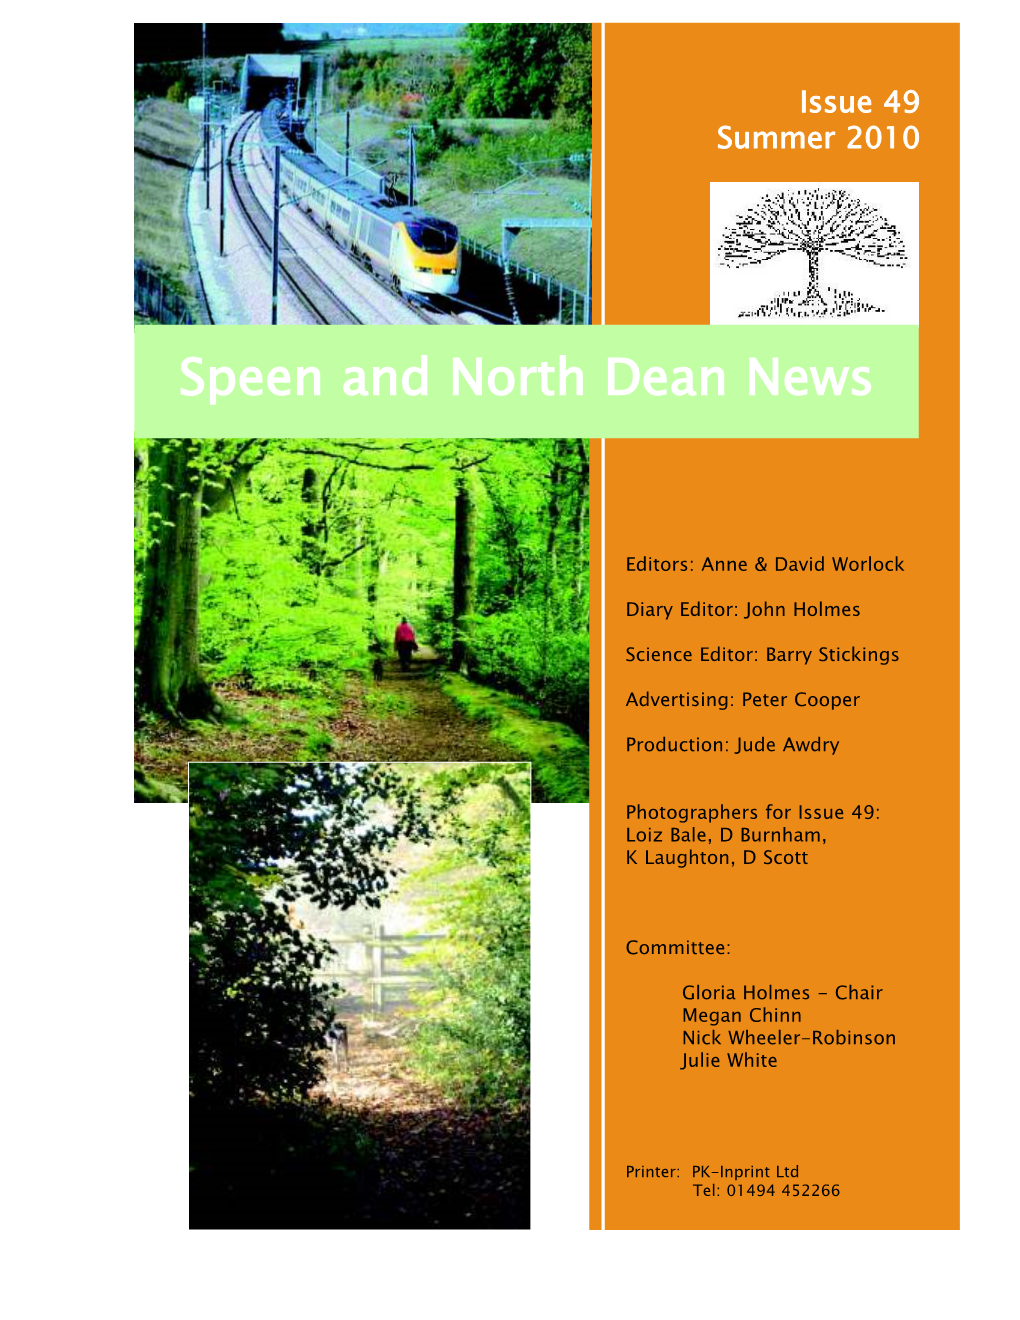 Speen and North Dean News